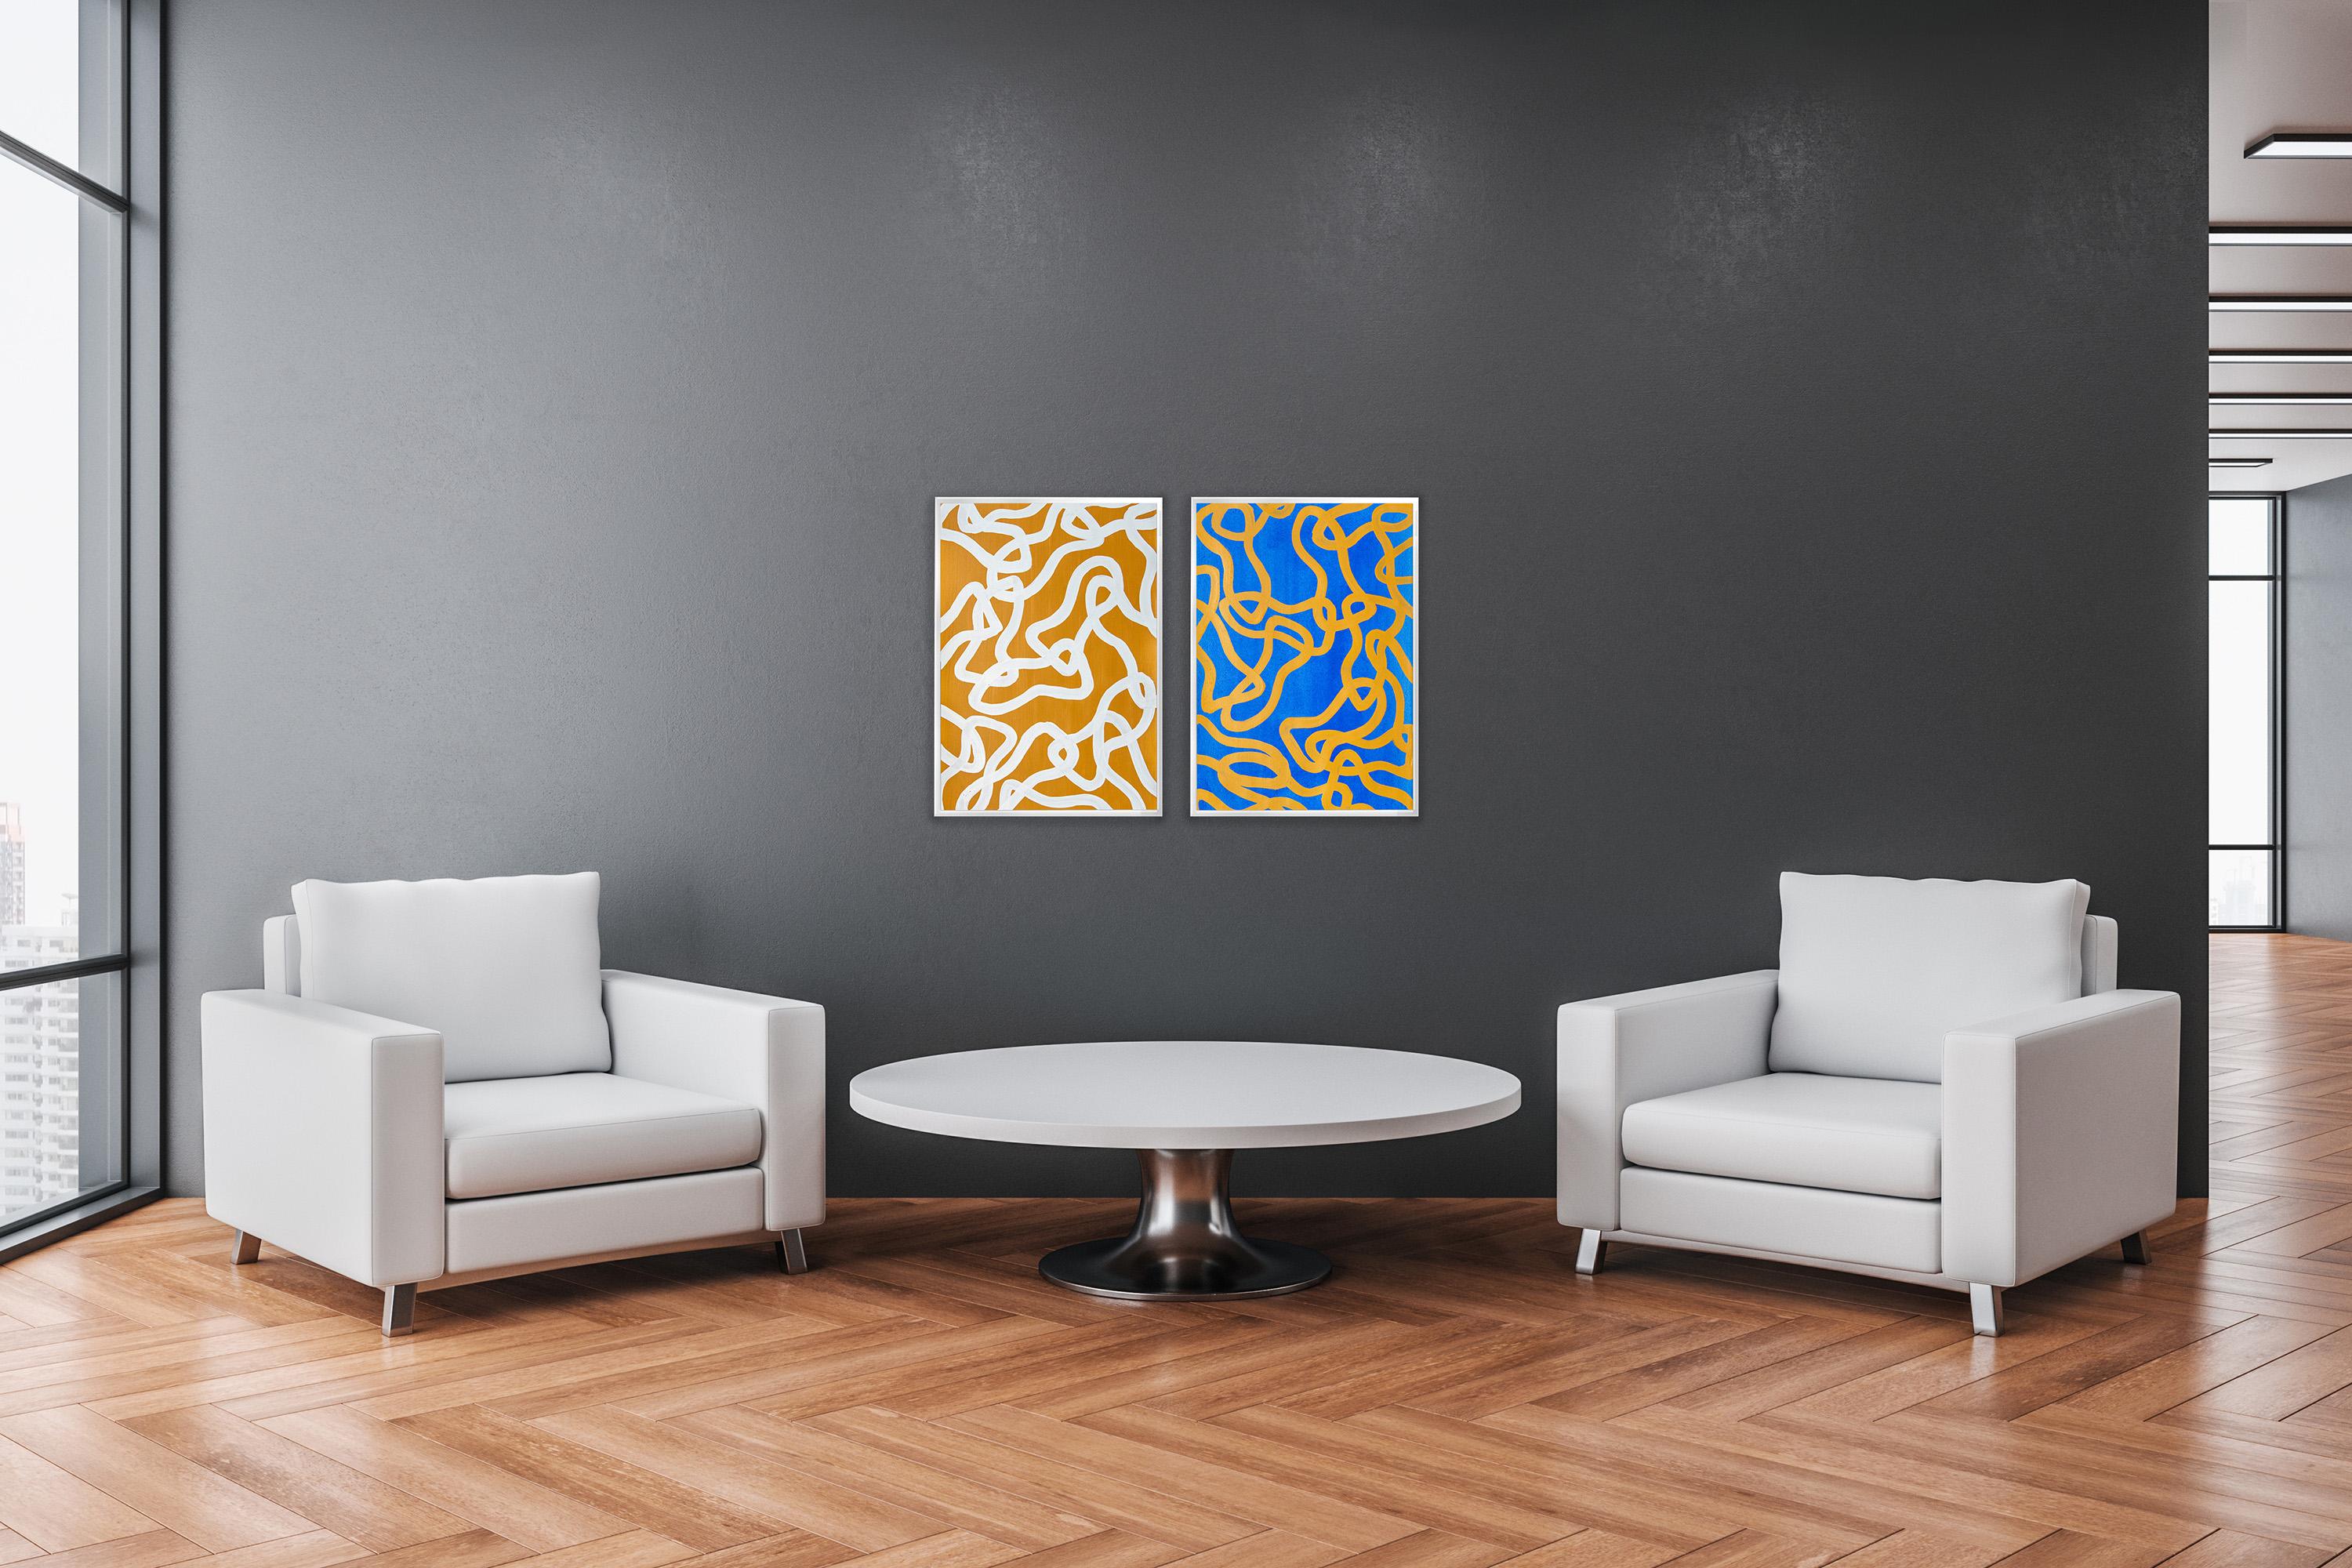 Salty N 2 & 4, Yellow, Blue Diptych, Overlapping Abstract Fishes, Mediterranean For Sale 4